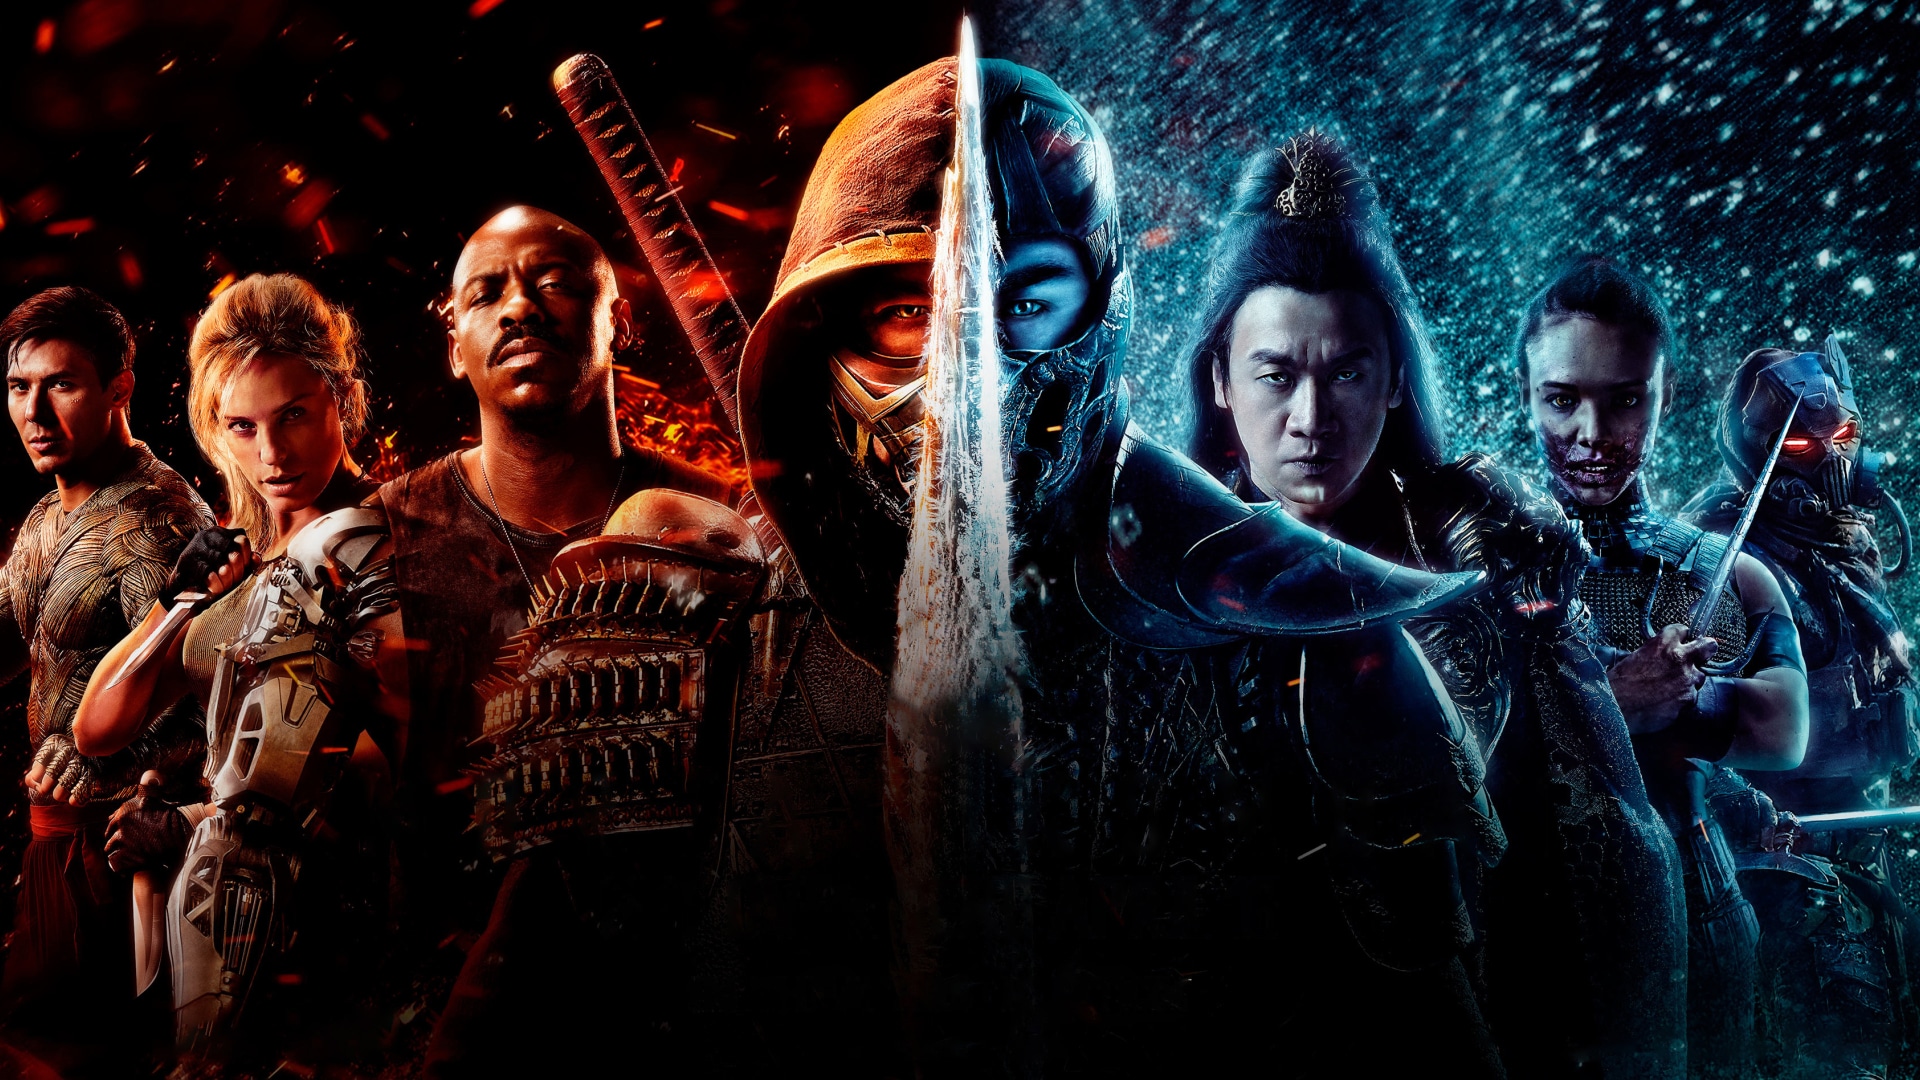 Mortal Kombat The Film Will Be Made Hired Writer Of Moon